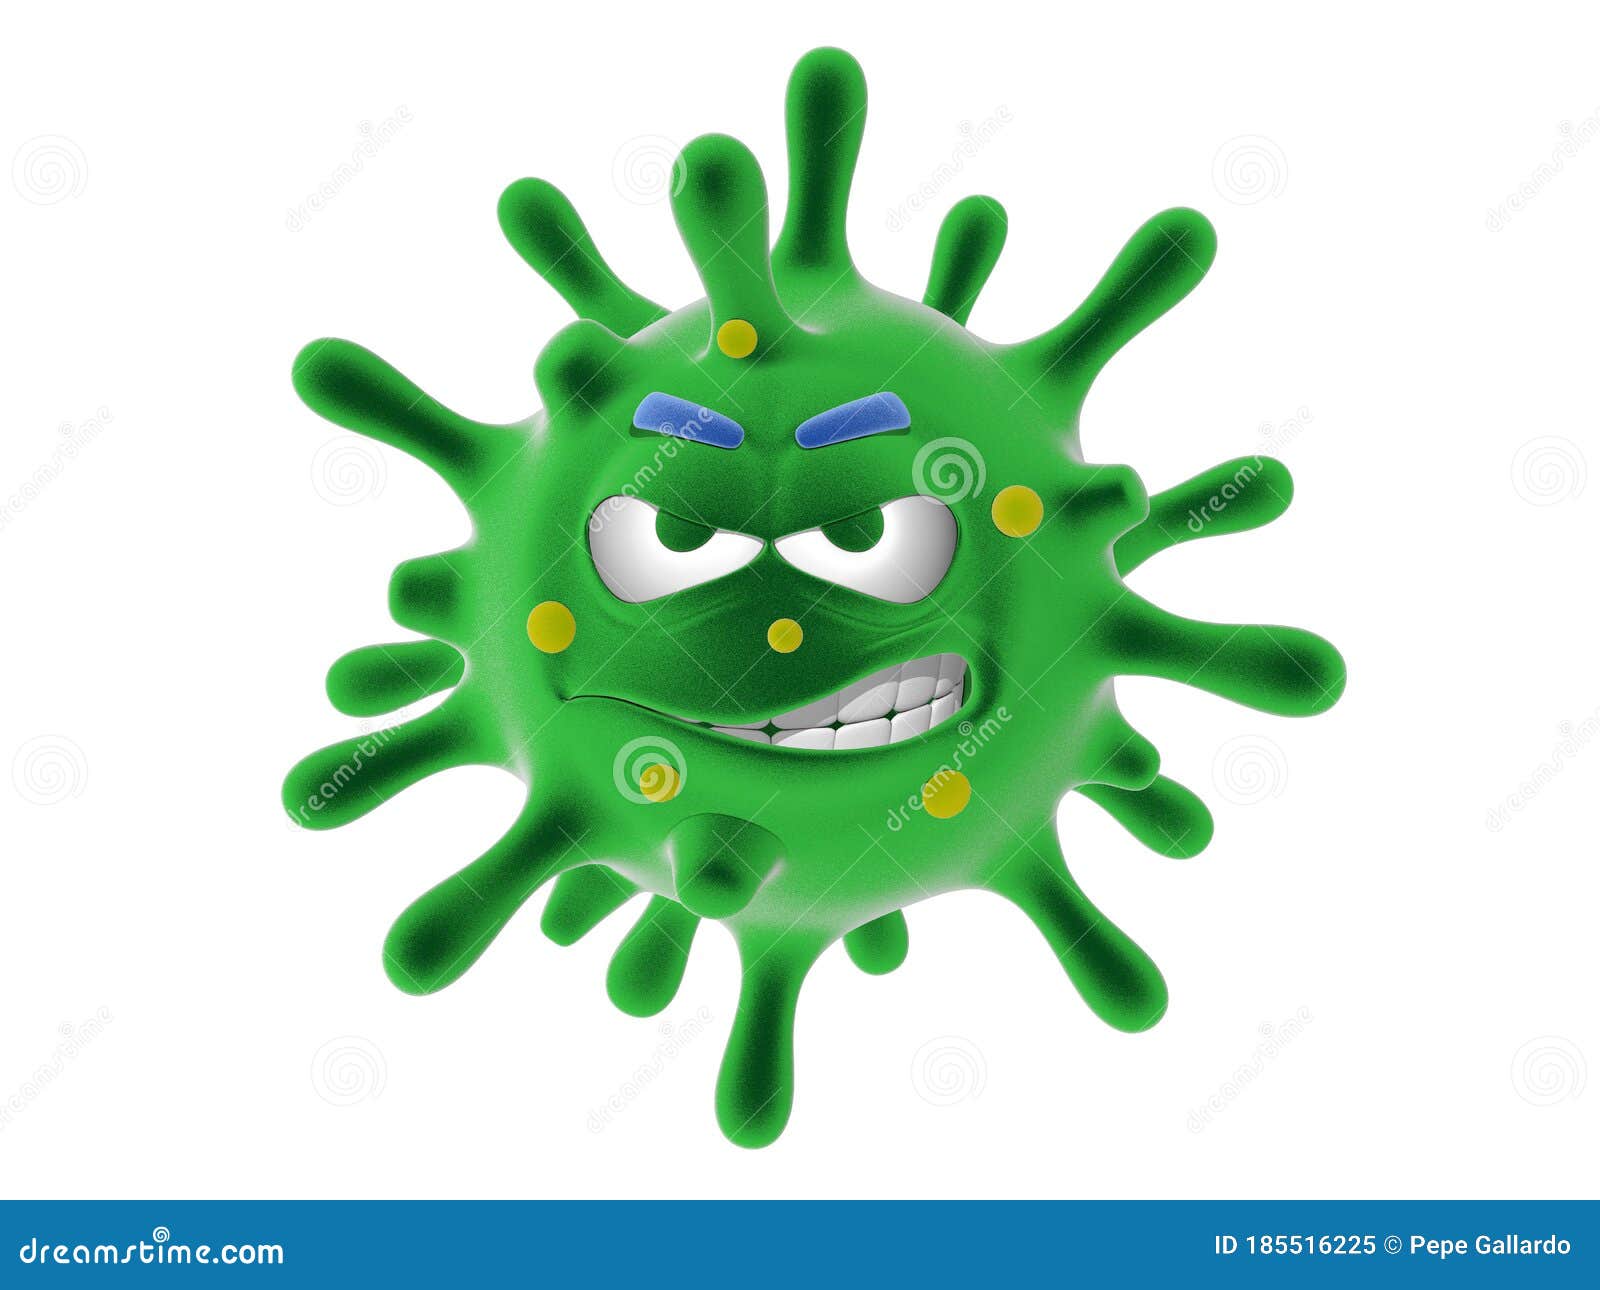 3d Illustration of a Virus Cartoon of a Disease with an Angry and  Aggressive Face. Stock Illustration - Illustration of green, cold: 185516225